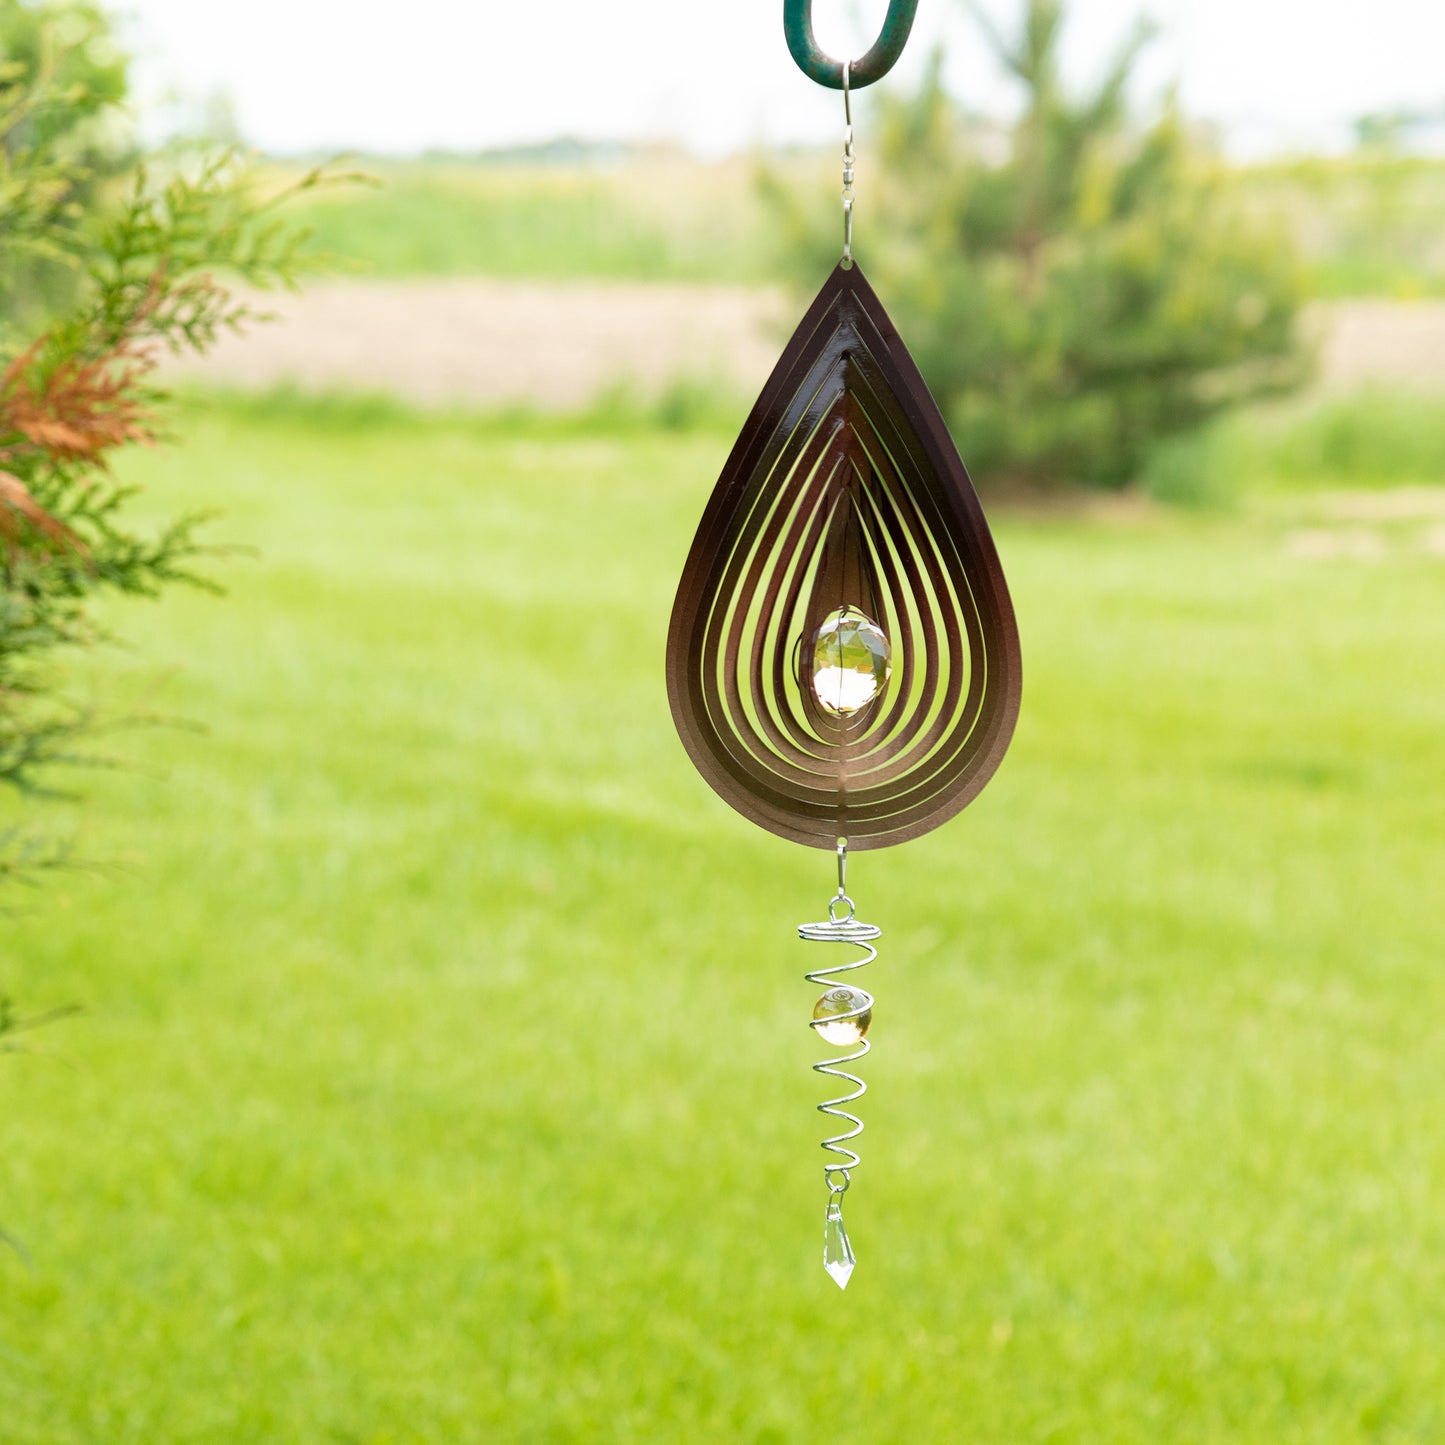 Color-Changing Jewel Illusion Spinner Wind Chime